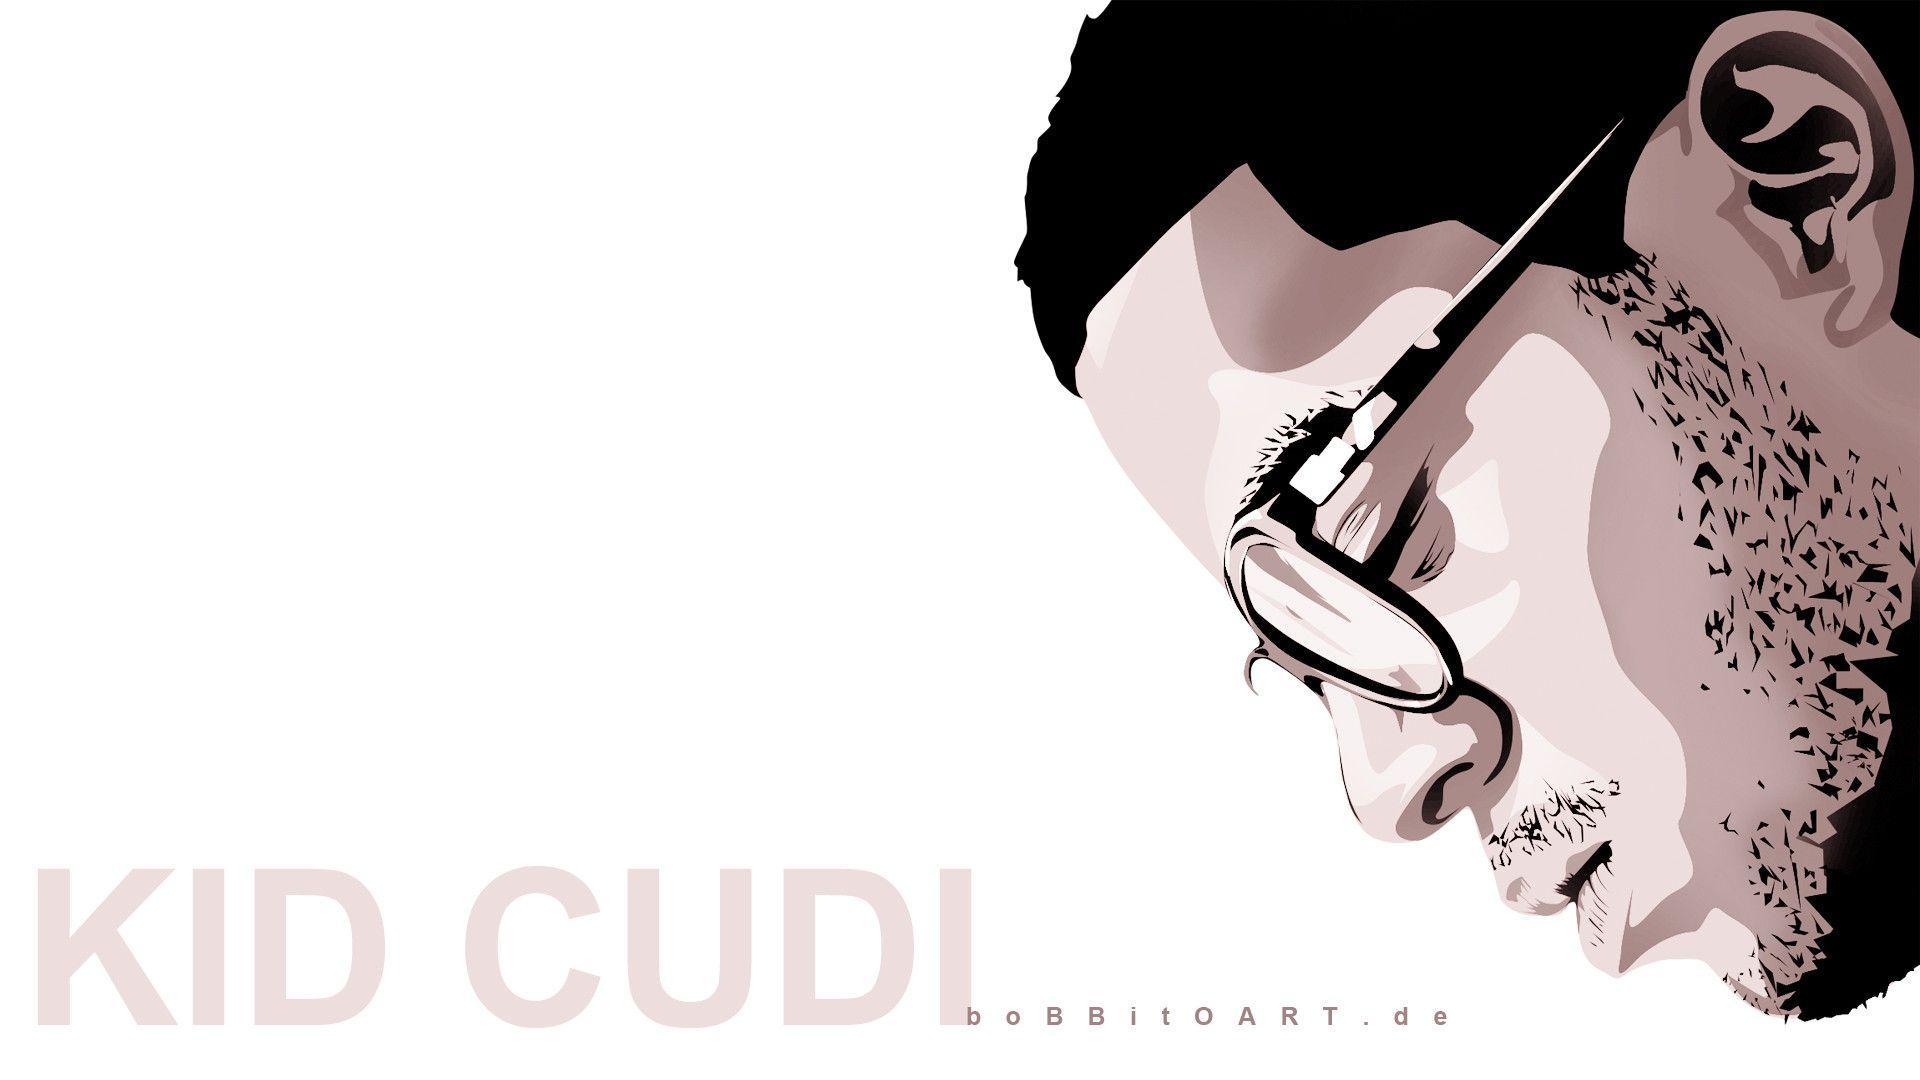 Kid Cudi HD Wallpaper and Background